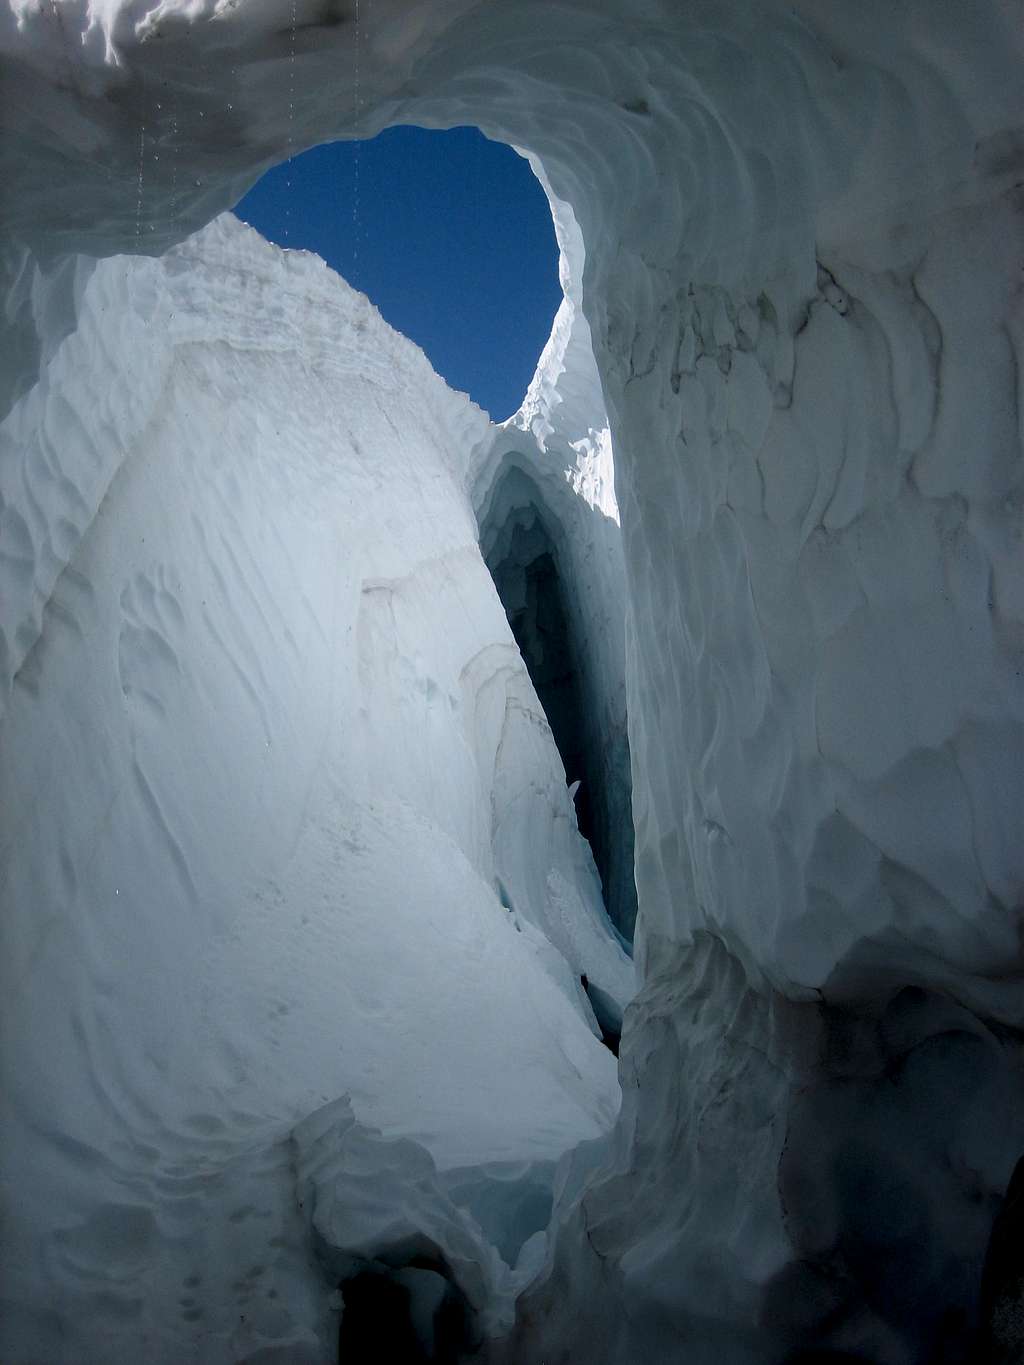 Inside a huge crevasse looking out